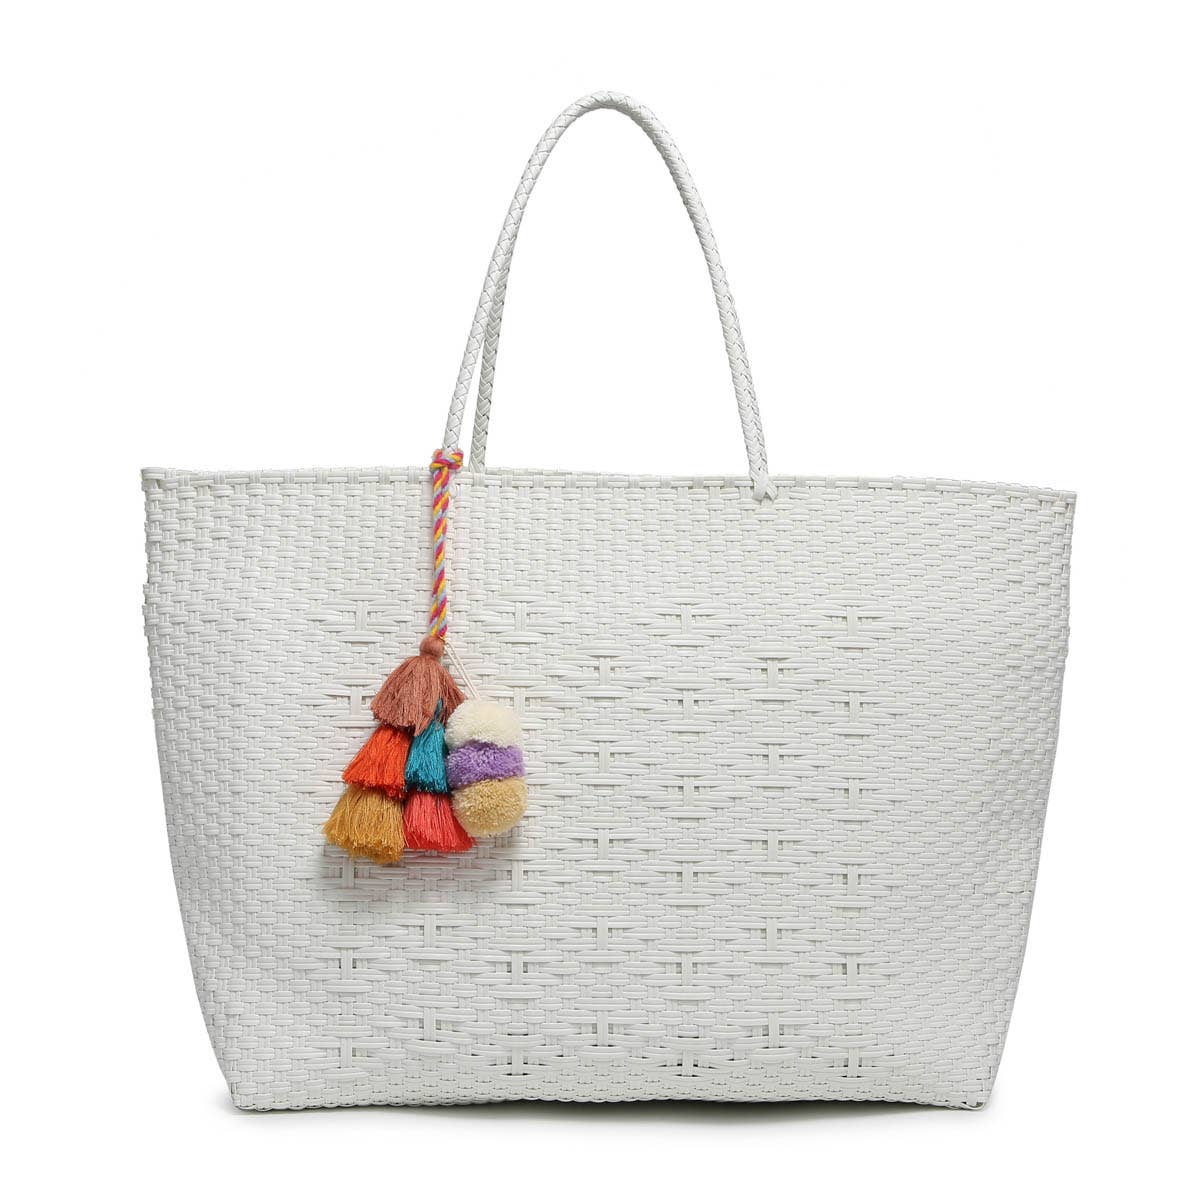 Shelby Large Handwoven Tote w/ Pom-Poms-White